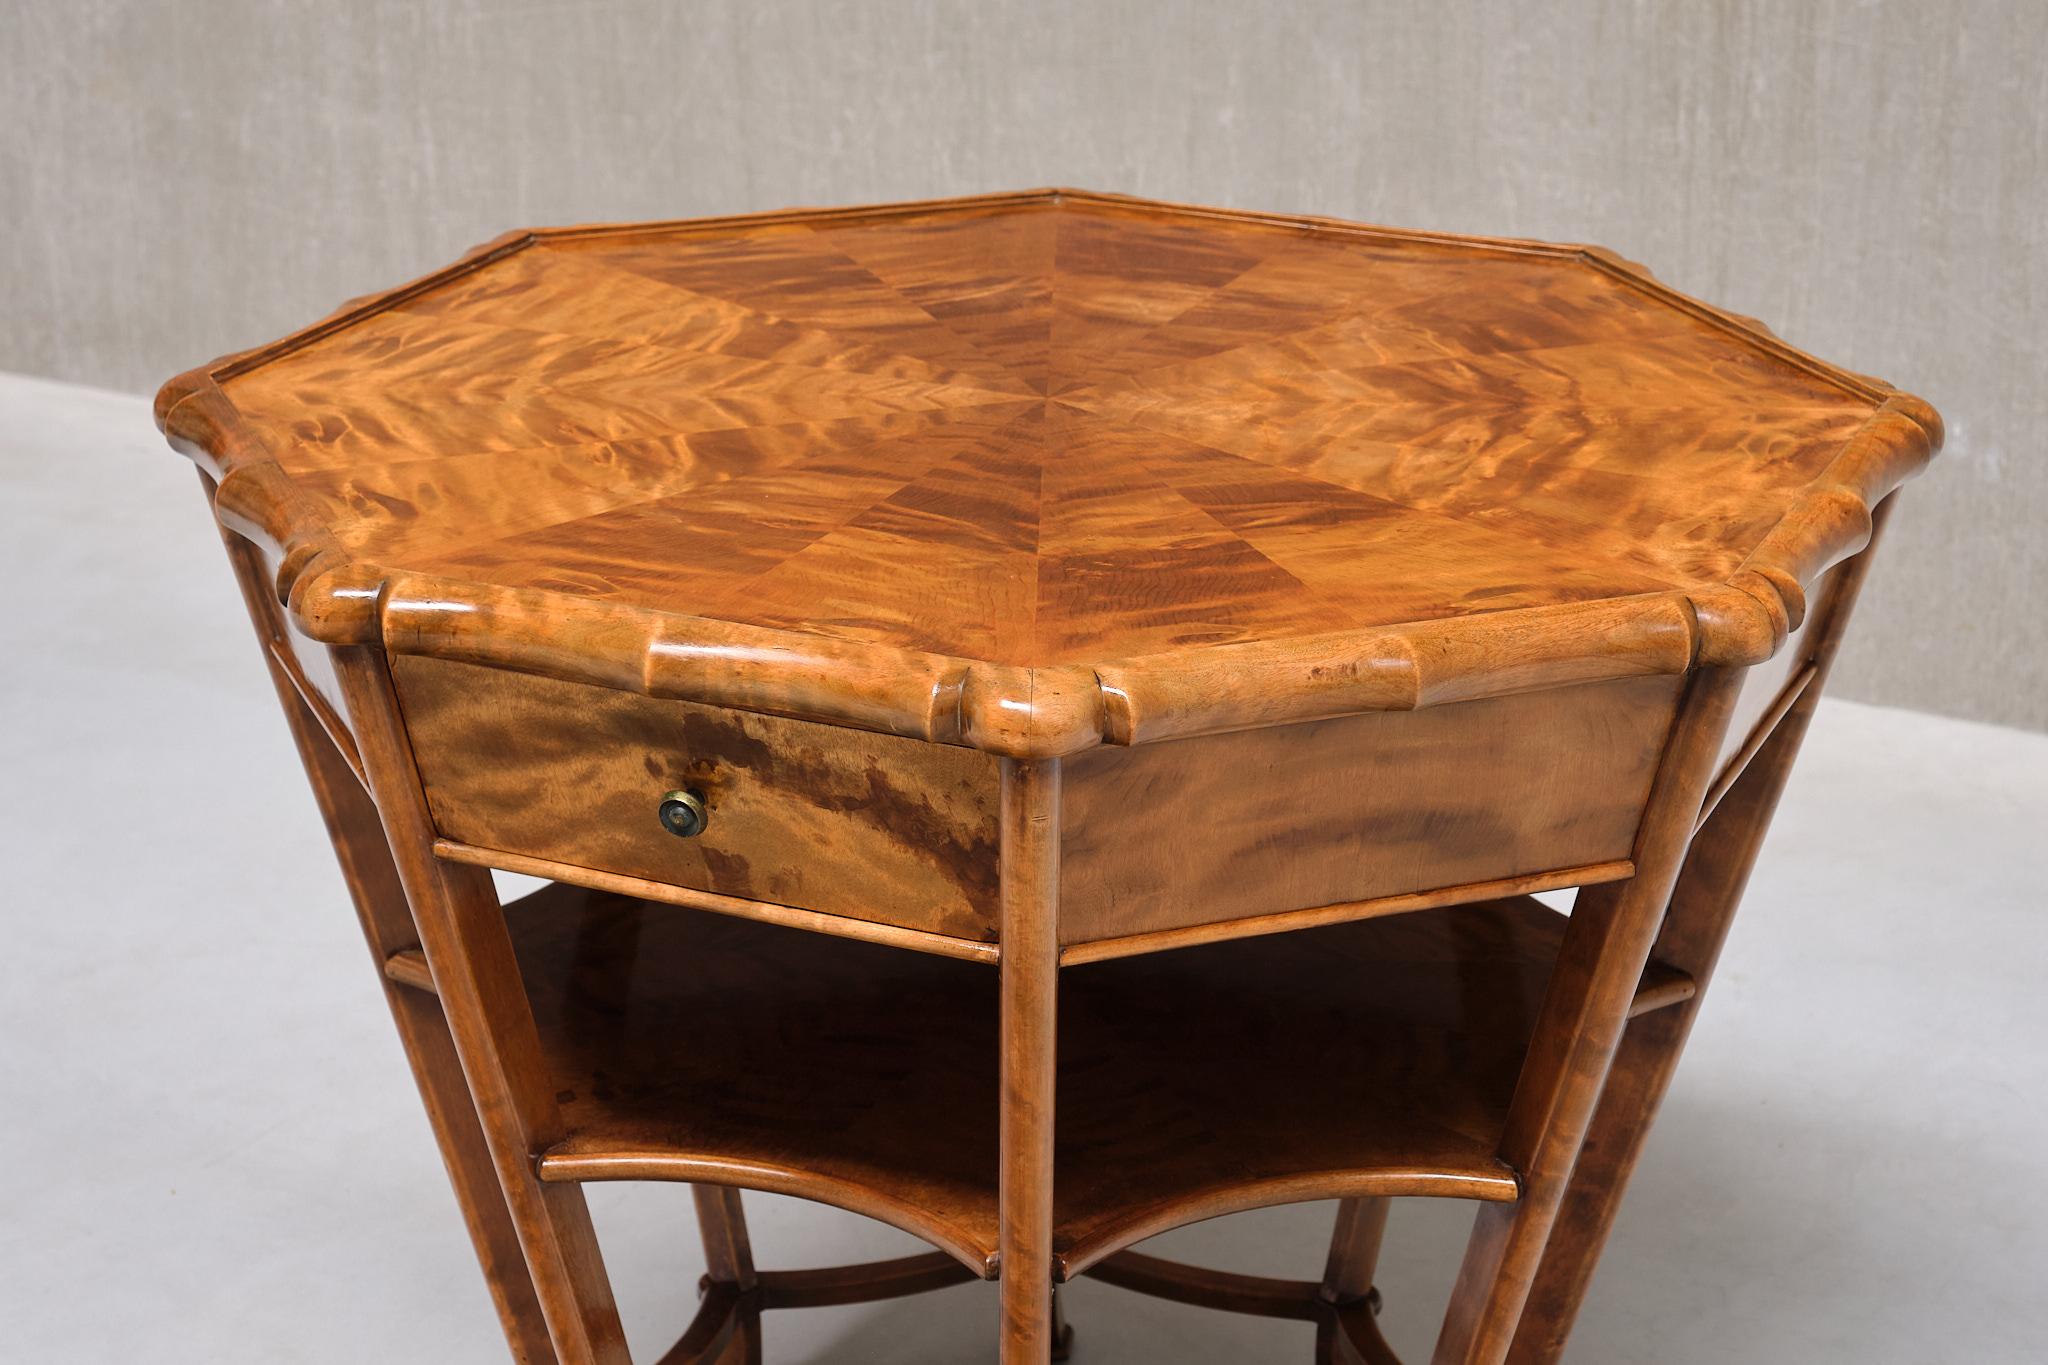 Art Deco Exceptional Expressionist Octagonal Center Table in Flamed Birch, Germany, 1920s For Sale